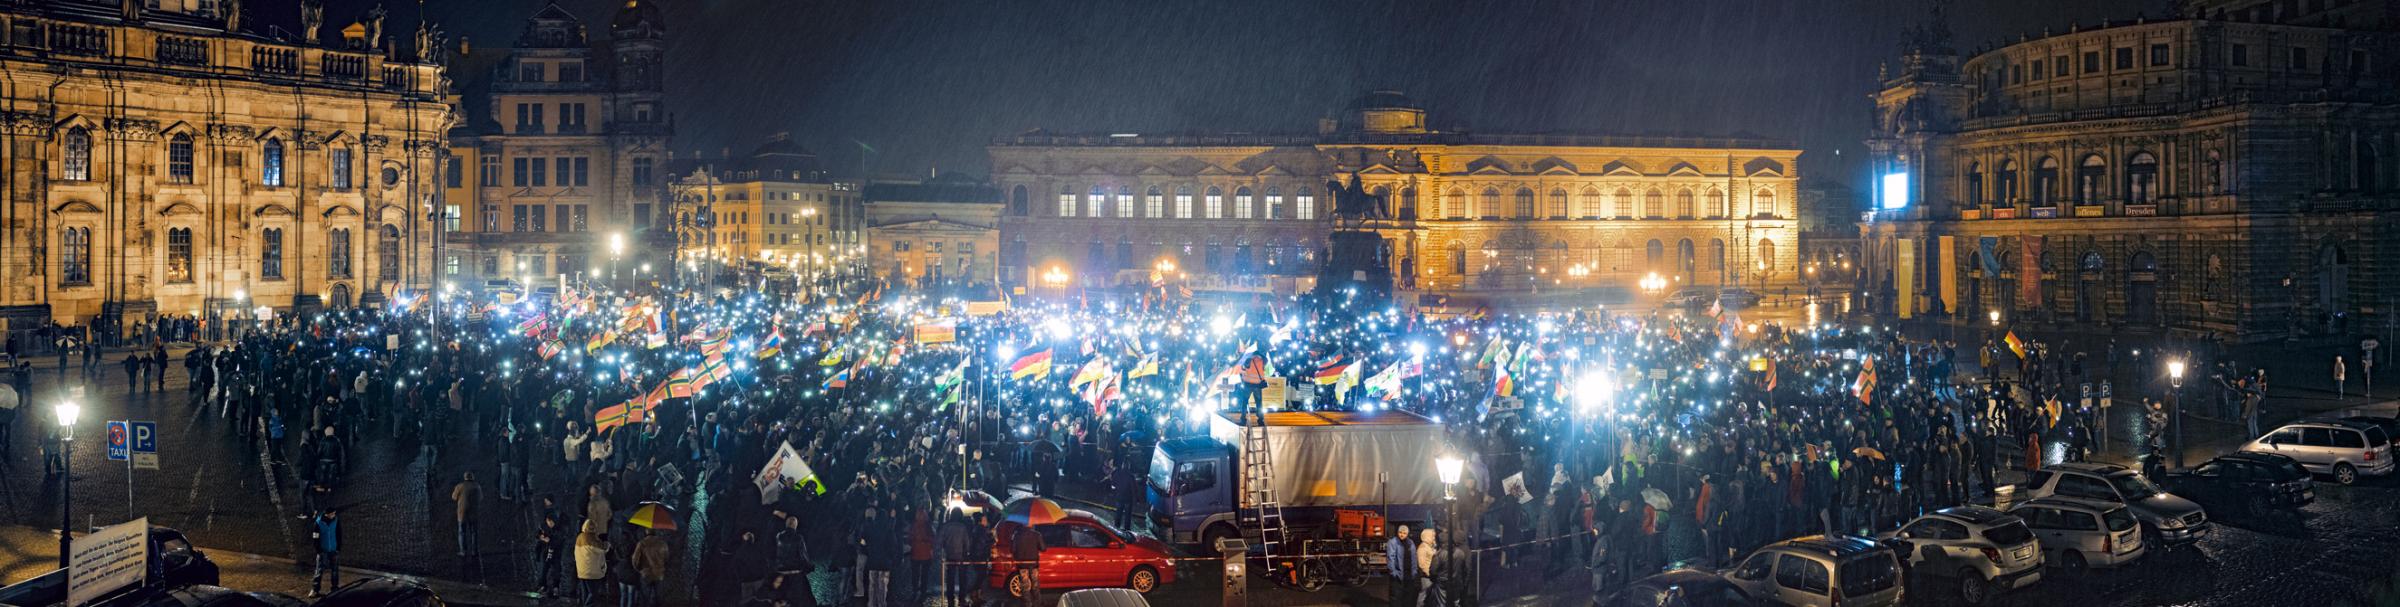 A right wing demonstration organized by the anti-Islamic movement called "Pegida" in Dresden, Germany. The protests take place each Monday evening.